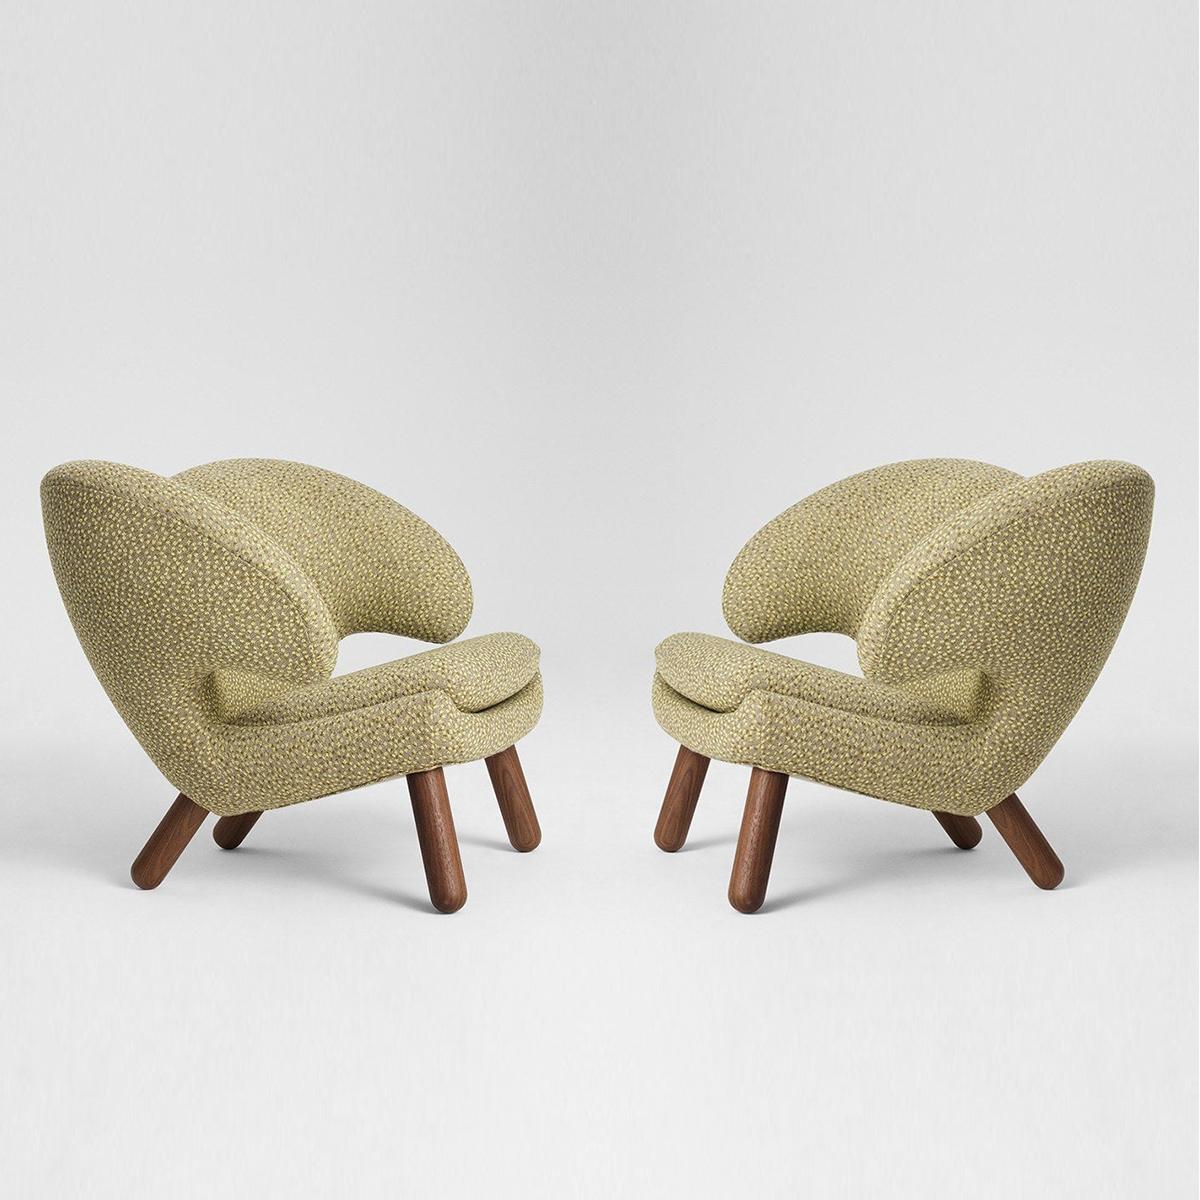 Set of Two Pelican Chairs in Fabric and Wood by Finn Juhl 1